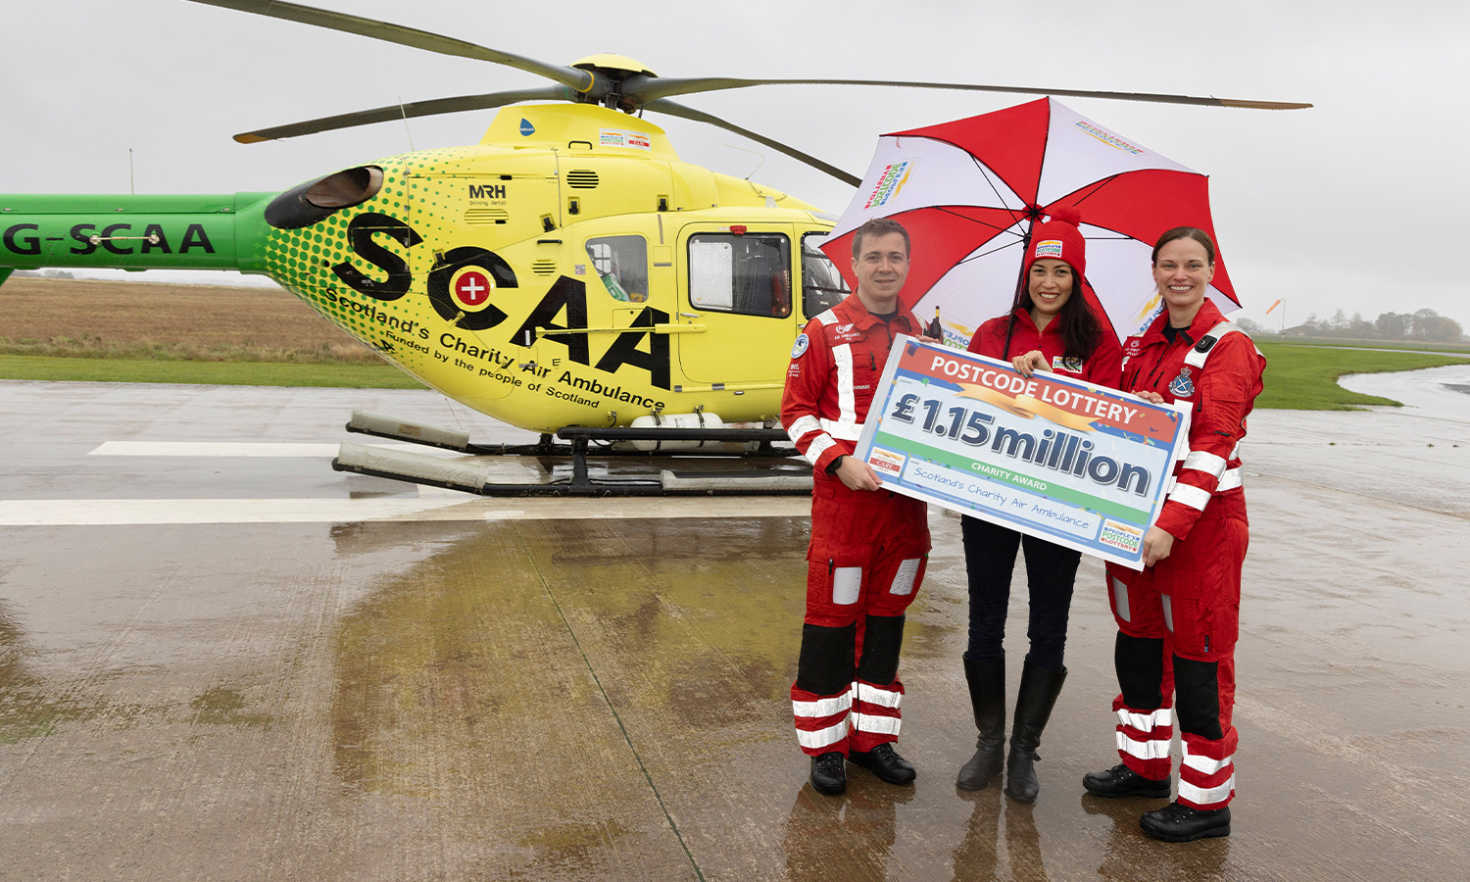 Over the past five years players of People's Postcode Lottery have raised over £1 Million for Scotland's Charity Air Ambulance (SCAA)